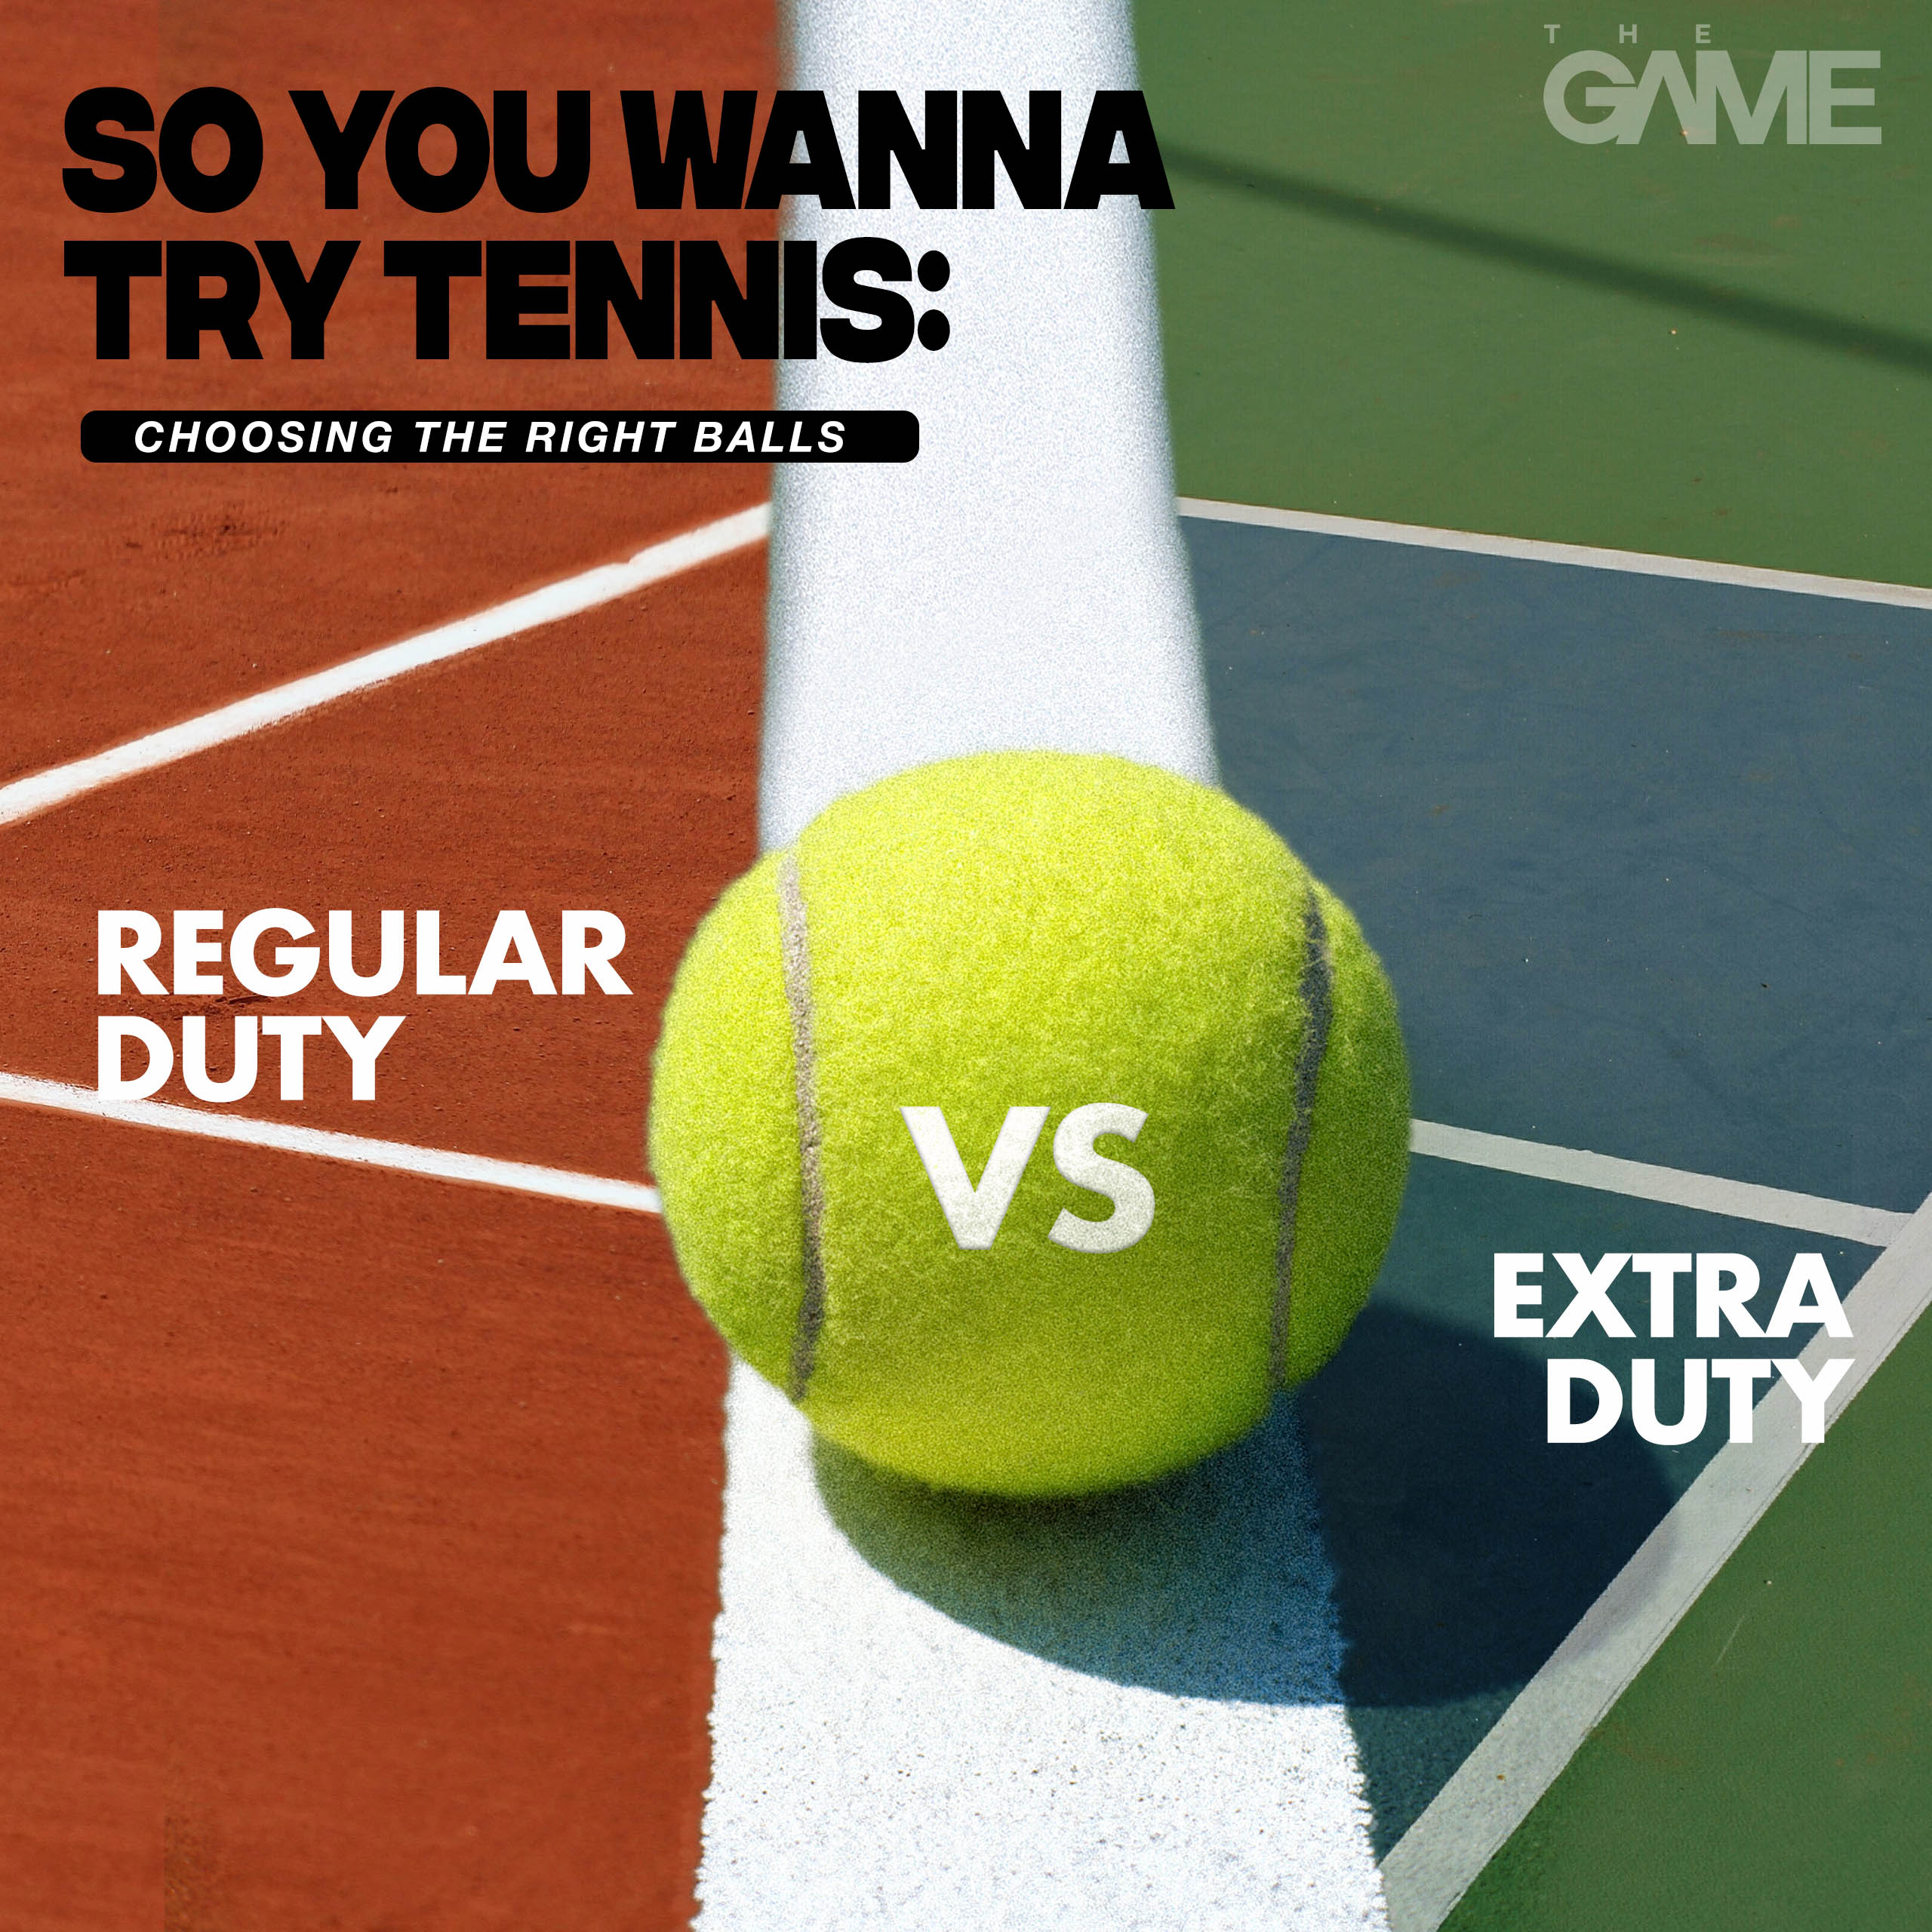 There are two main kinds of tennis balls: Regular Duty and Extra Duty.